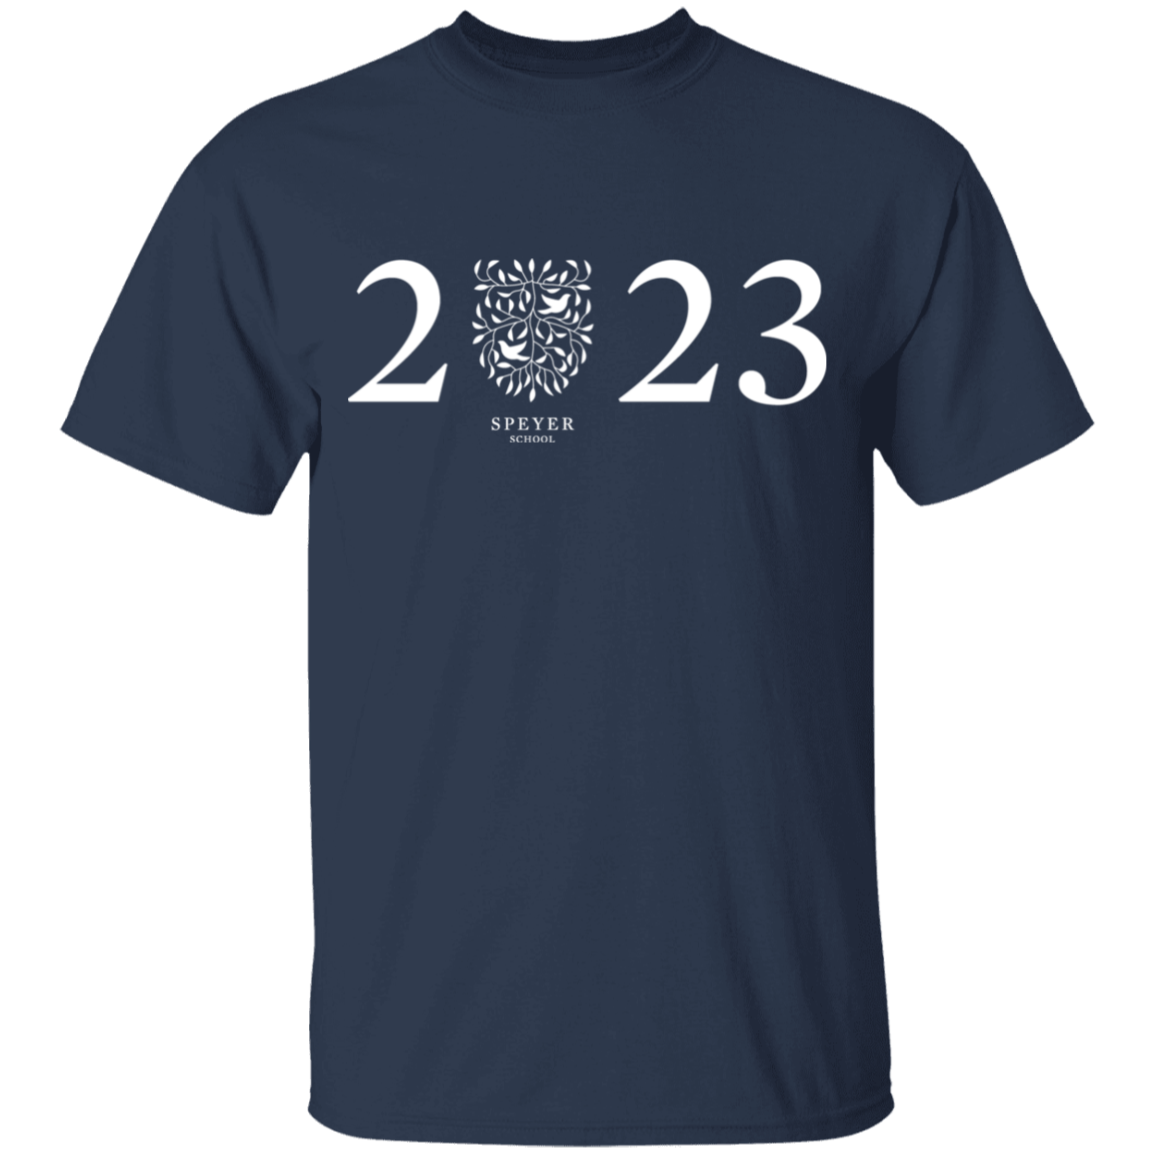 Class of 2023 T-Shirt, Youth Sizes